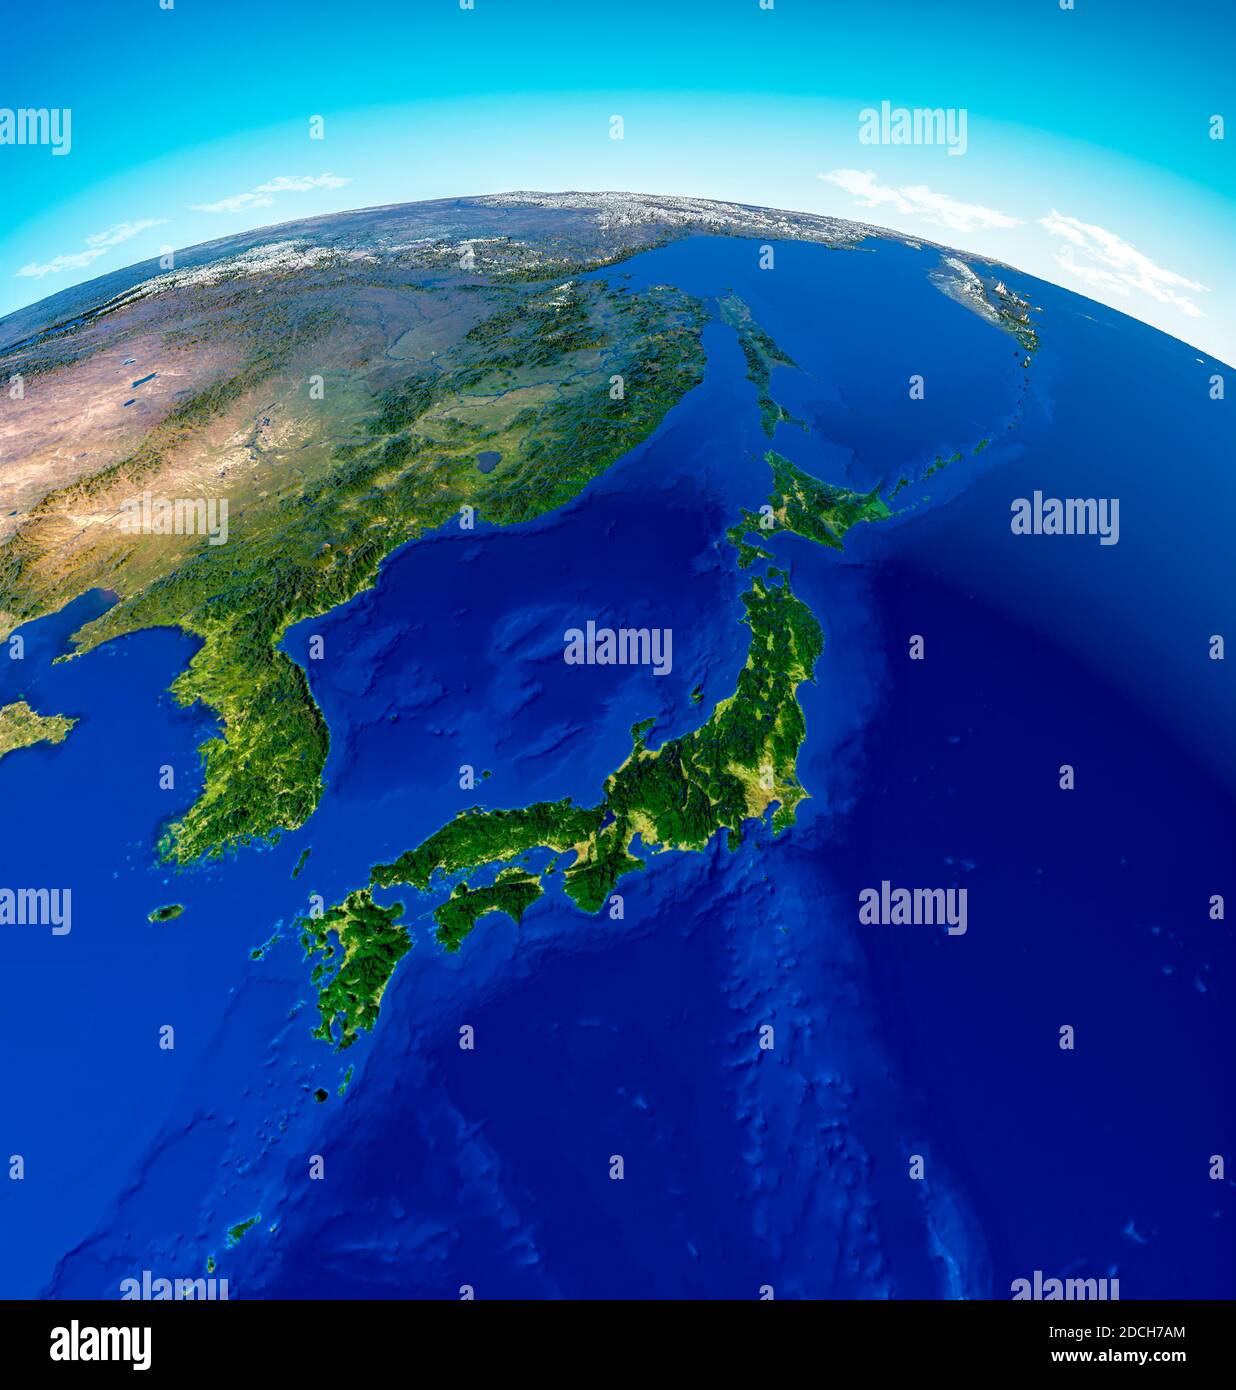 Globe Map Of Japan North Korea And South Korea Physical Map Asia East Asia Map With Reliefs And Mountains And Pacific Ocean Atlas Cartography Stock Photo Alamy